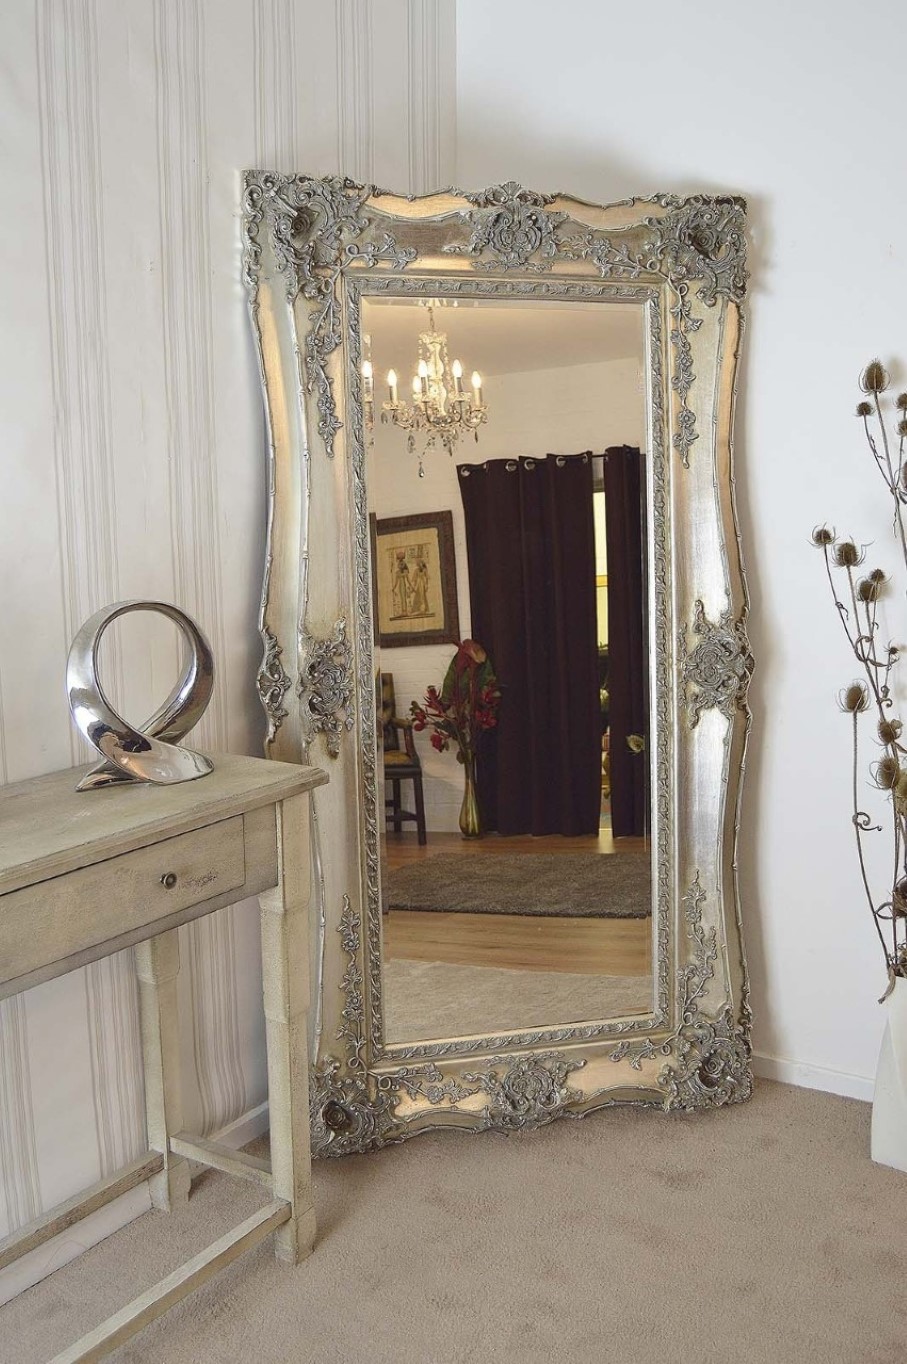 Corner Wall Carving Amazing Corner Wall Mirror With Carving Detailing Frame Idea Plus Rustic Narrow Console Table Interior Design  Large Wall Mirrors Beautifying Each Your Interior Space Well 